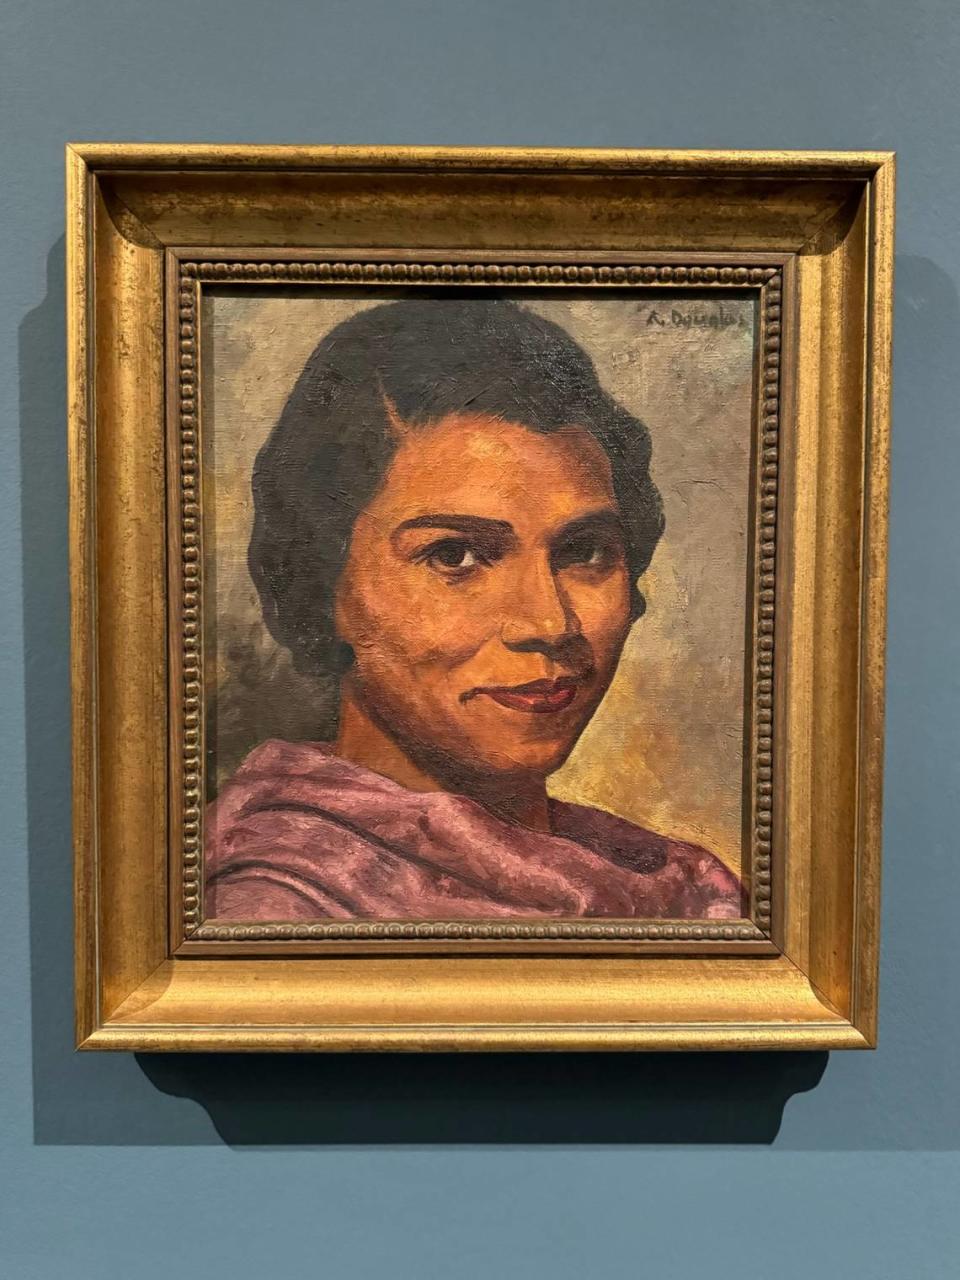 A painting of singer and civil rights icon Marian Anderson painted by artist Aaron Douglas in 1940. The portrait is on display at The Wolfsonian - FIU for the exhibition “Silhouettes: Image and Word in the Harlem Renaissance.”